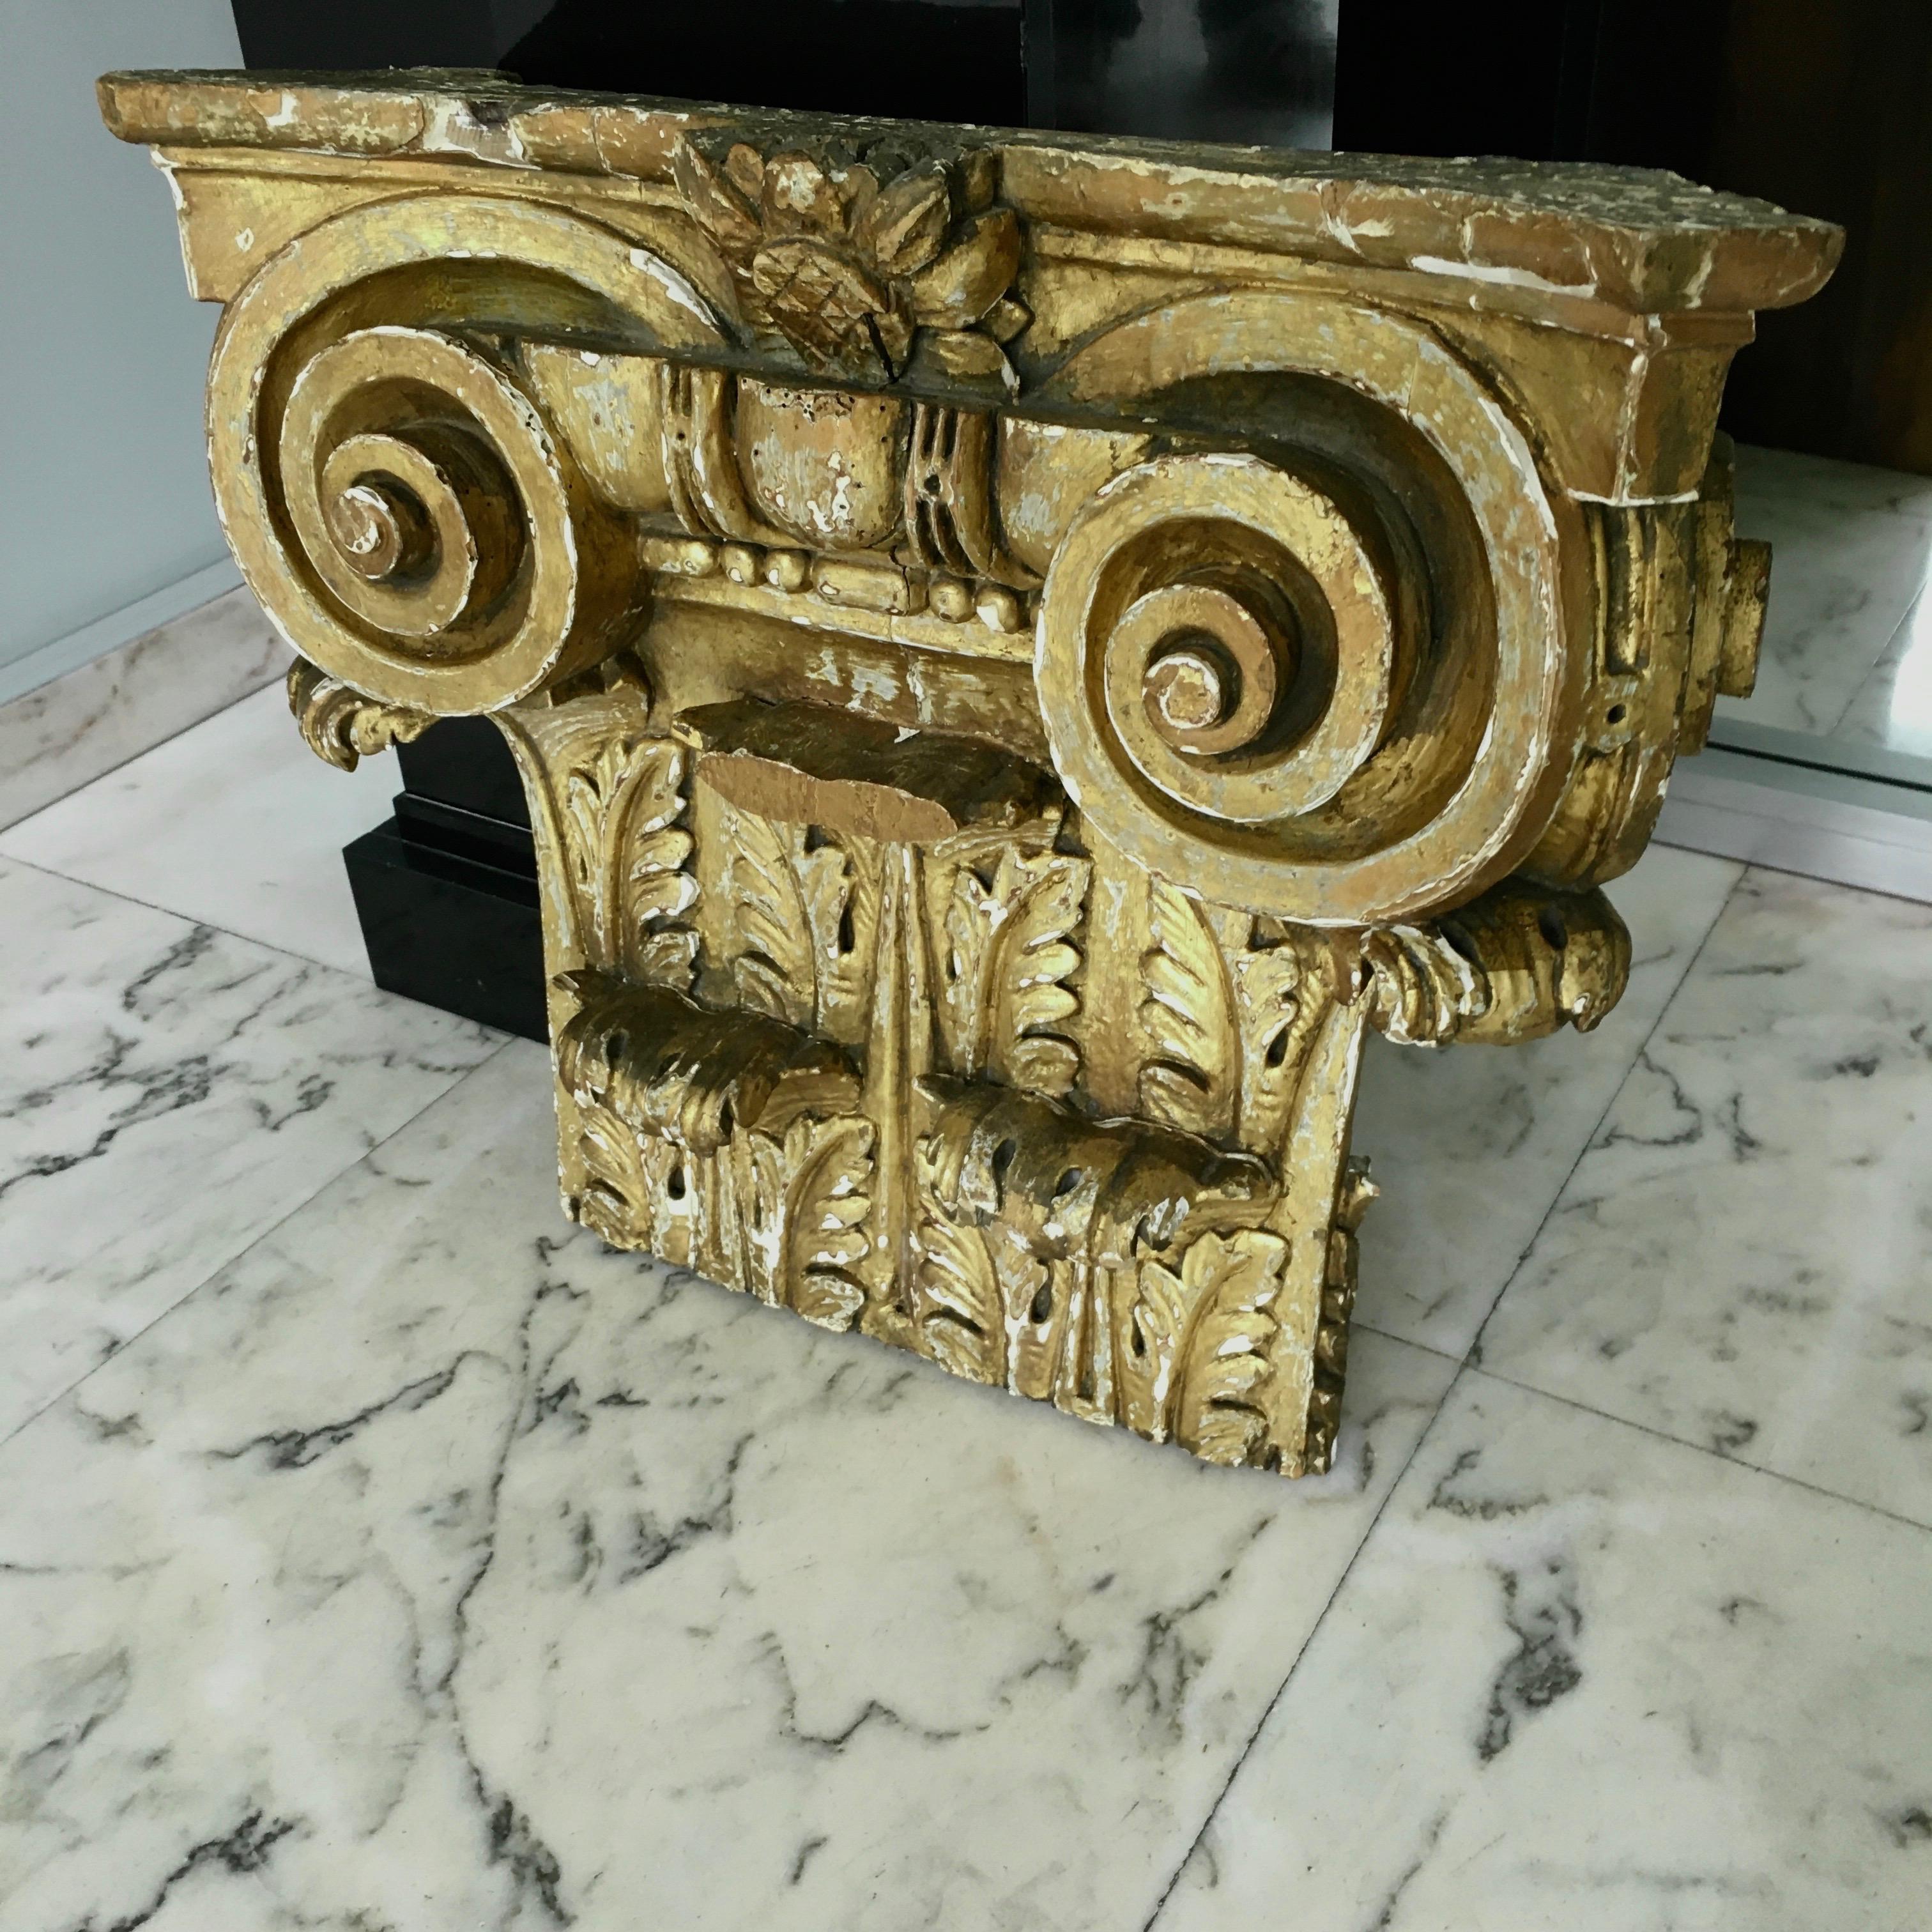 Highly decorative architectural element.
Strong patina.
France, around 1890.